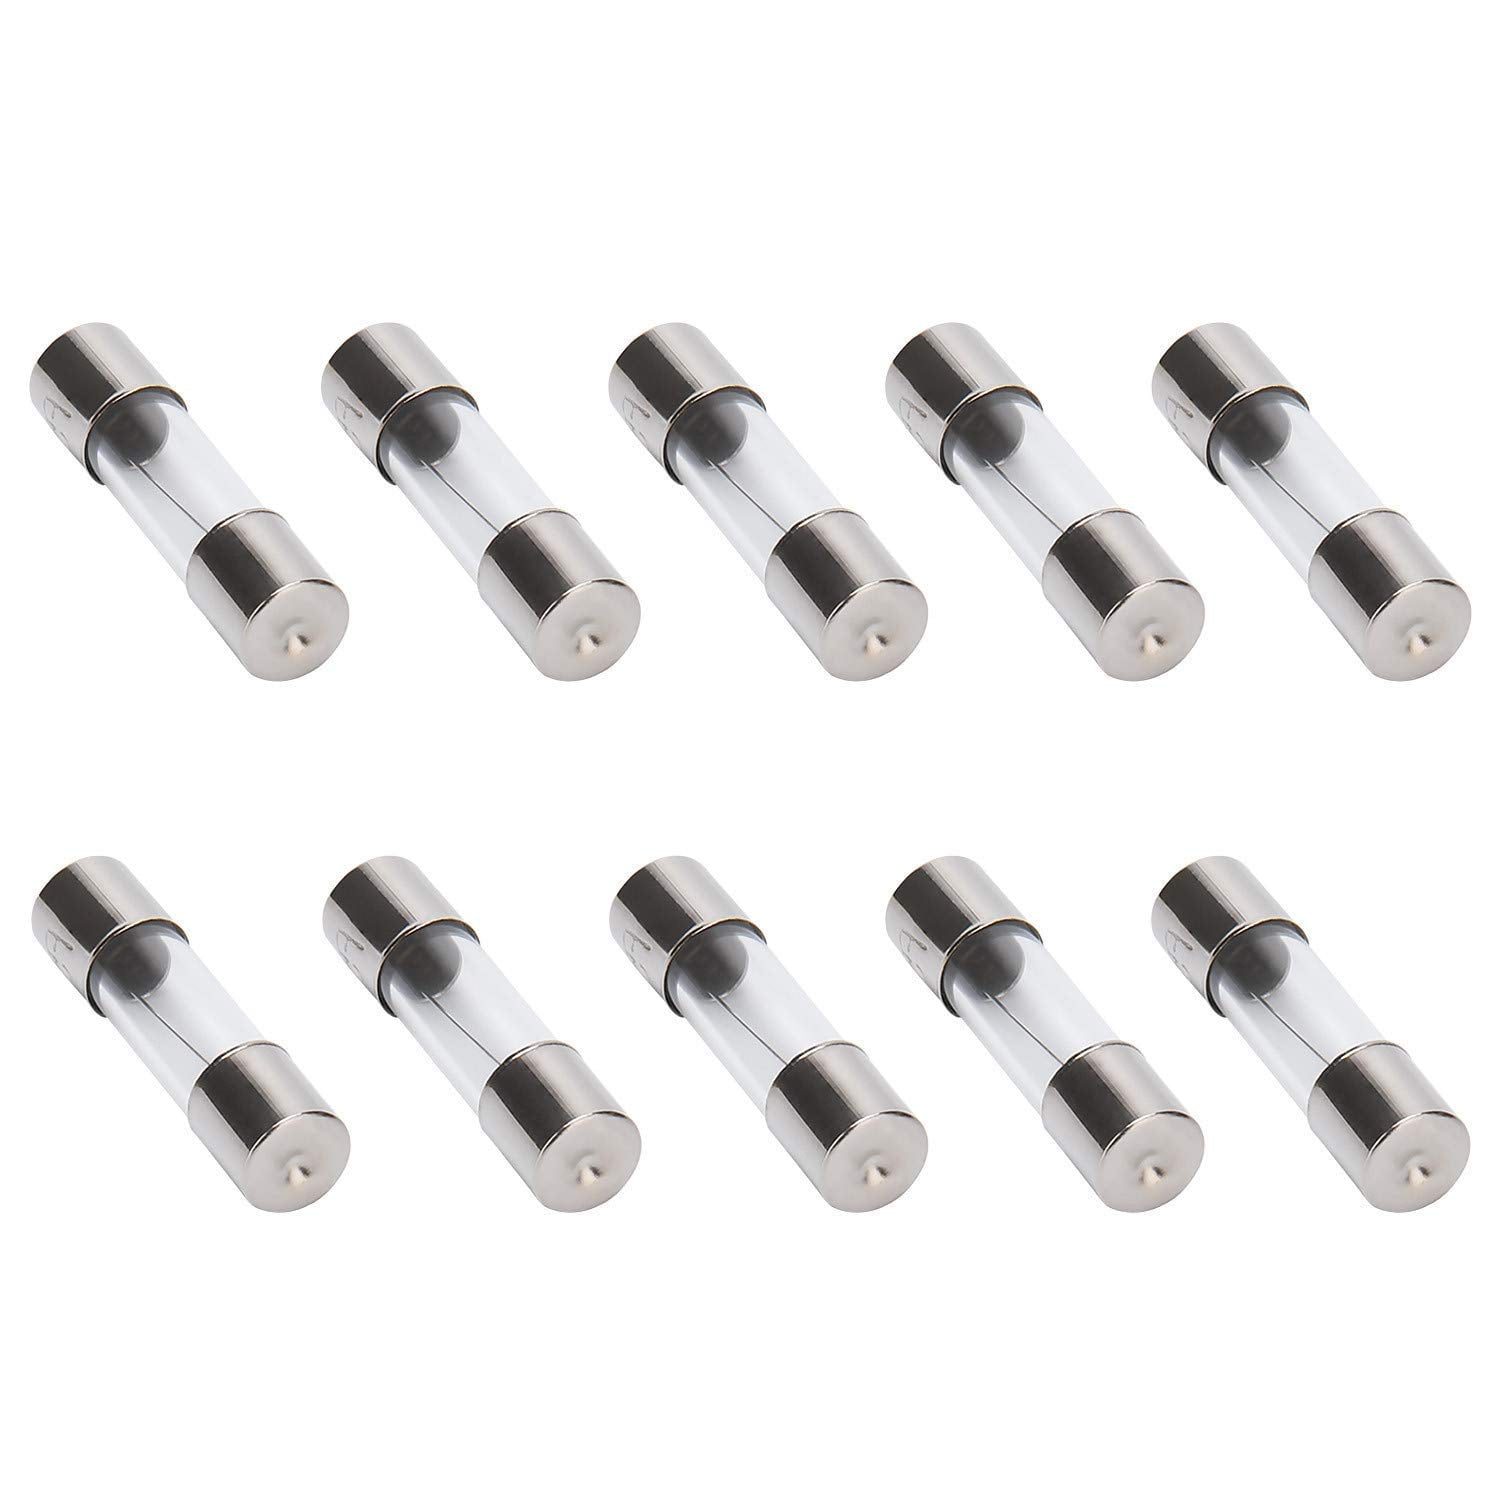 10 X 20MM FAST ACTING QUICK BLOW GLASS FUSE FUSES 500MA TO 10 AMP 